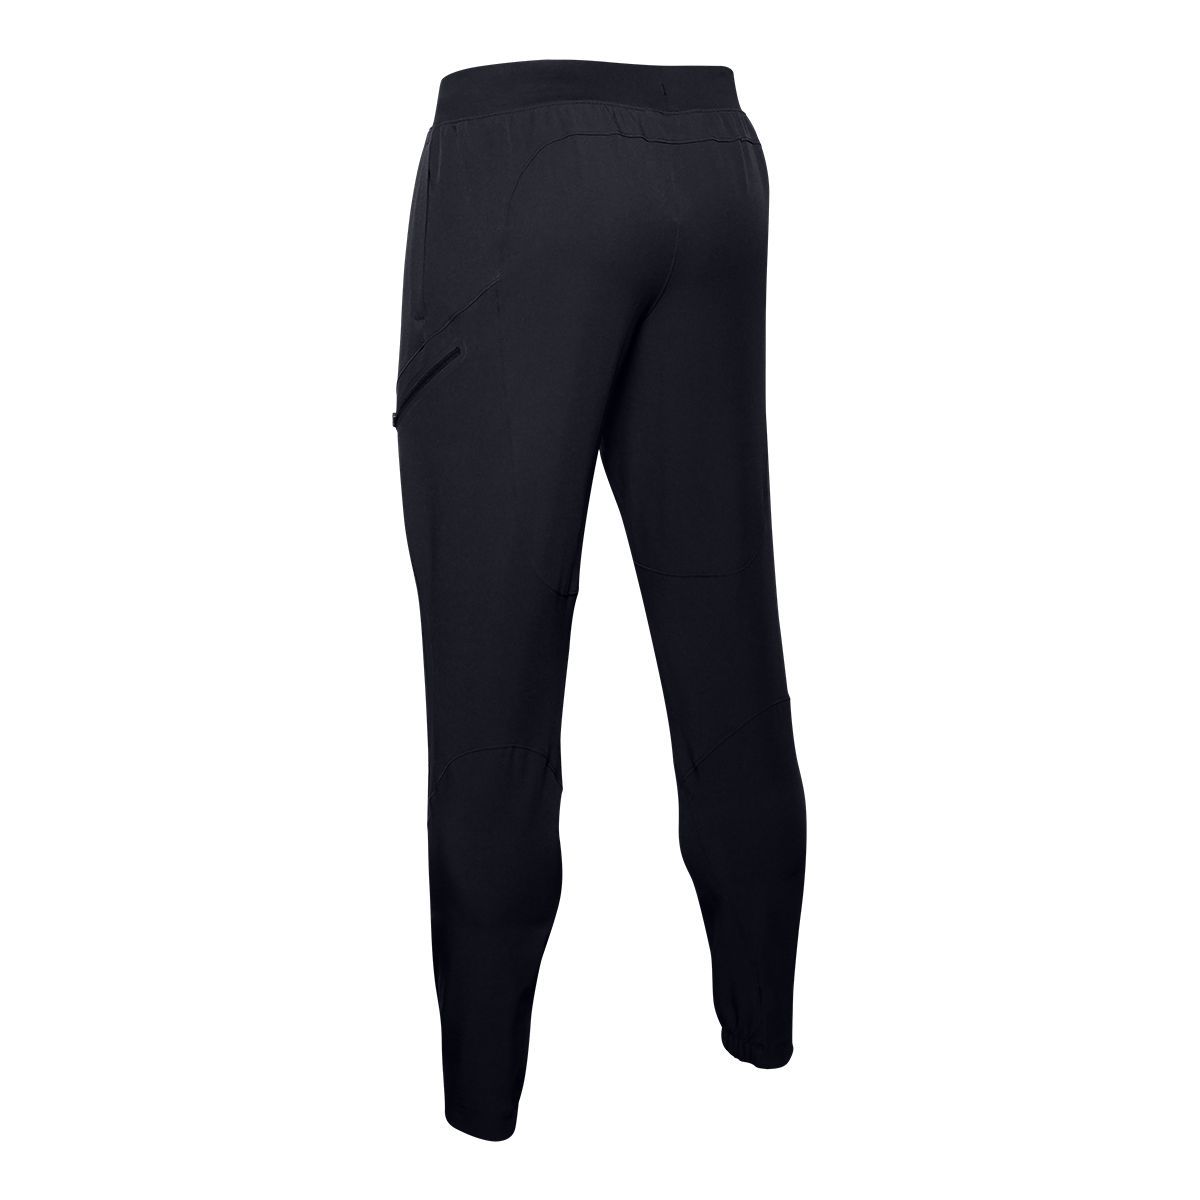  Under Armour Fleece Max Sport Perf Pants, Black  (001)/Reflective, Large : Clothing, Shoes & Jewelry